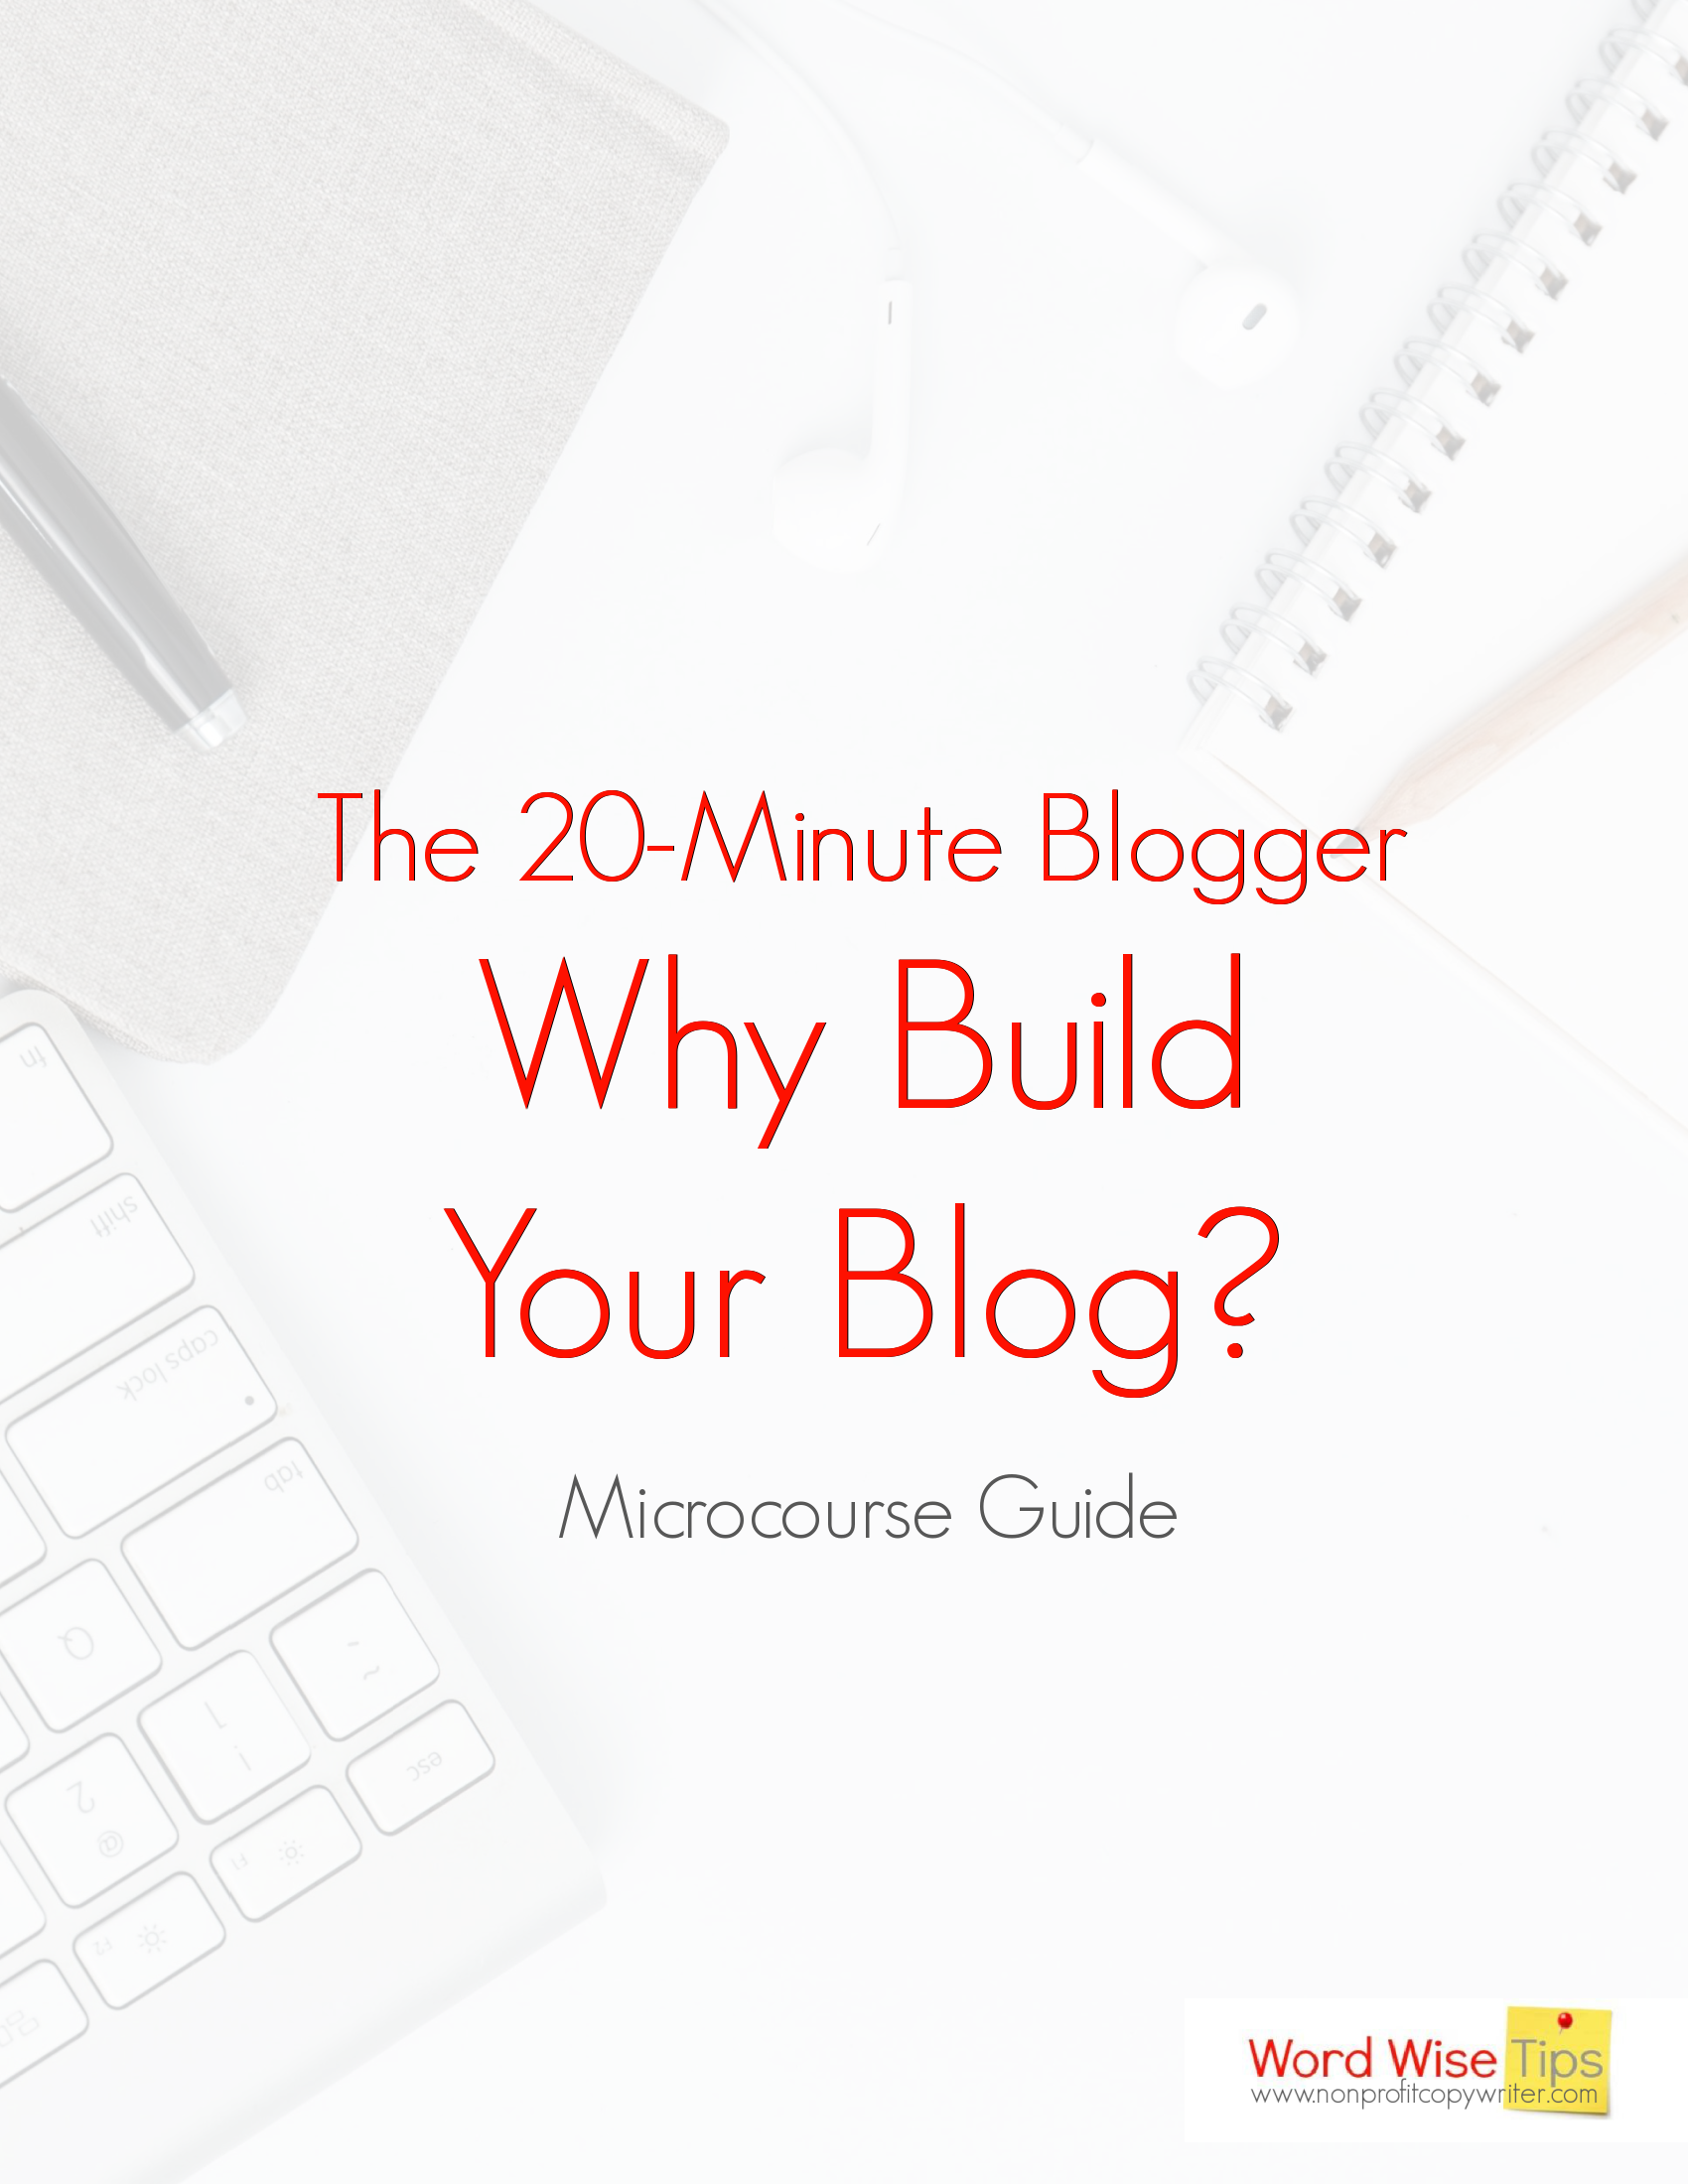 Why Build Your Blog? A free micro-course from Word Wise at Nonprofit Copywriter #onlinecourse #blogging #WritingTips